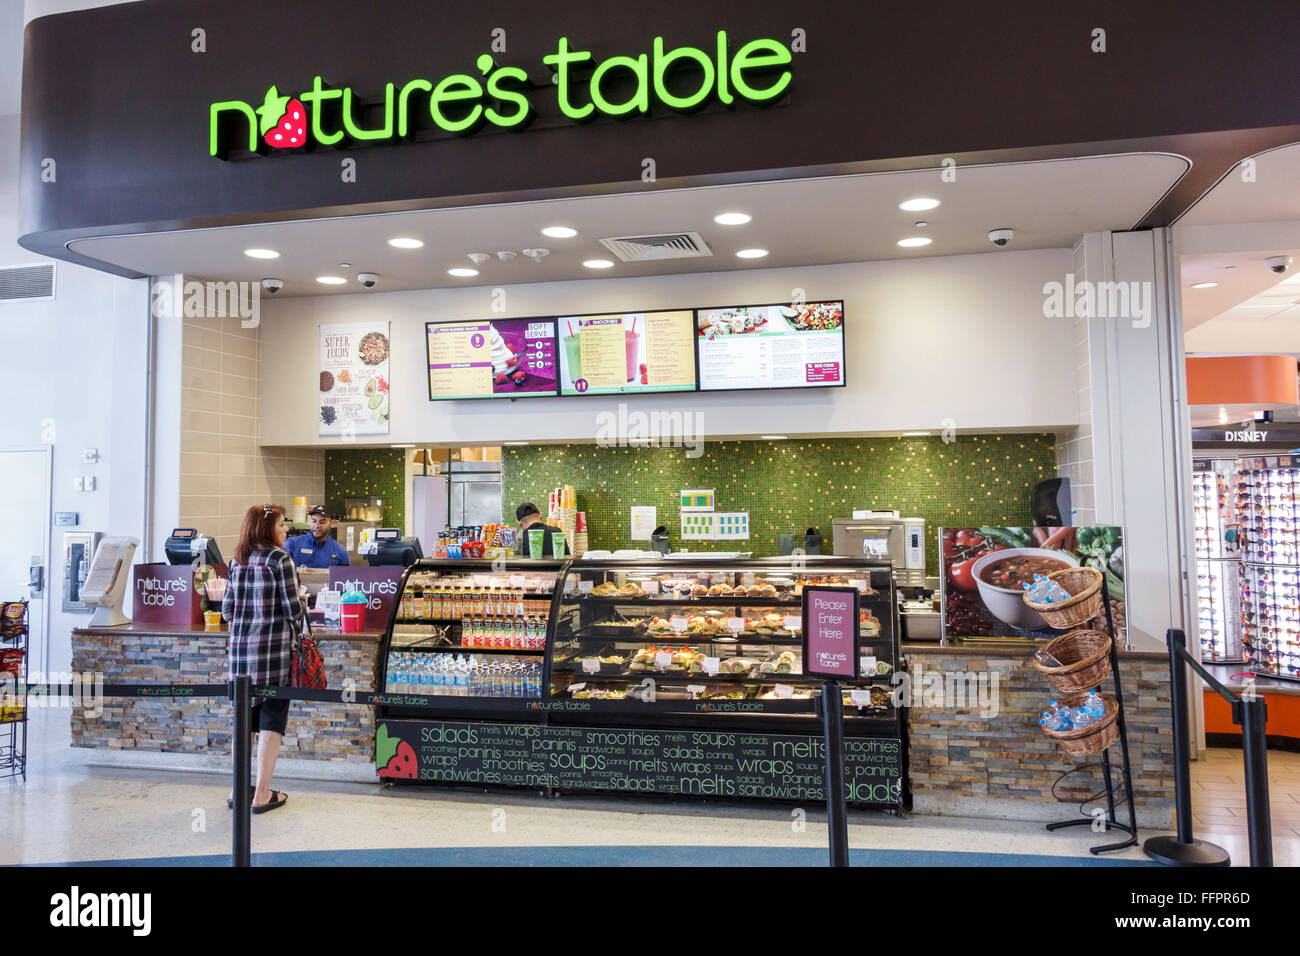 Florida South,Canoe Creek,Service Plaza,rest stop,interior inside,food court plaza,Nature's Table,counter,customer,FL151214022 Stock Photo